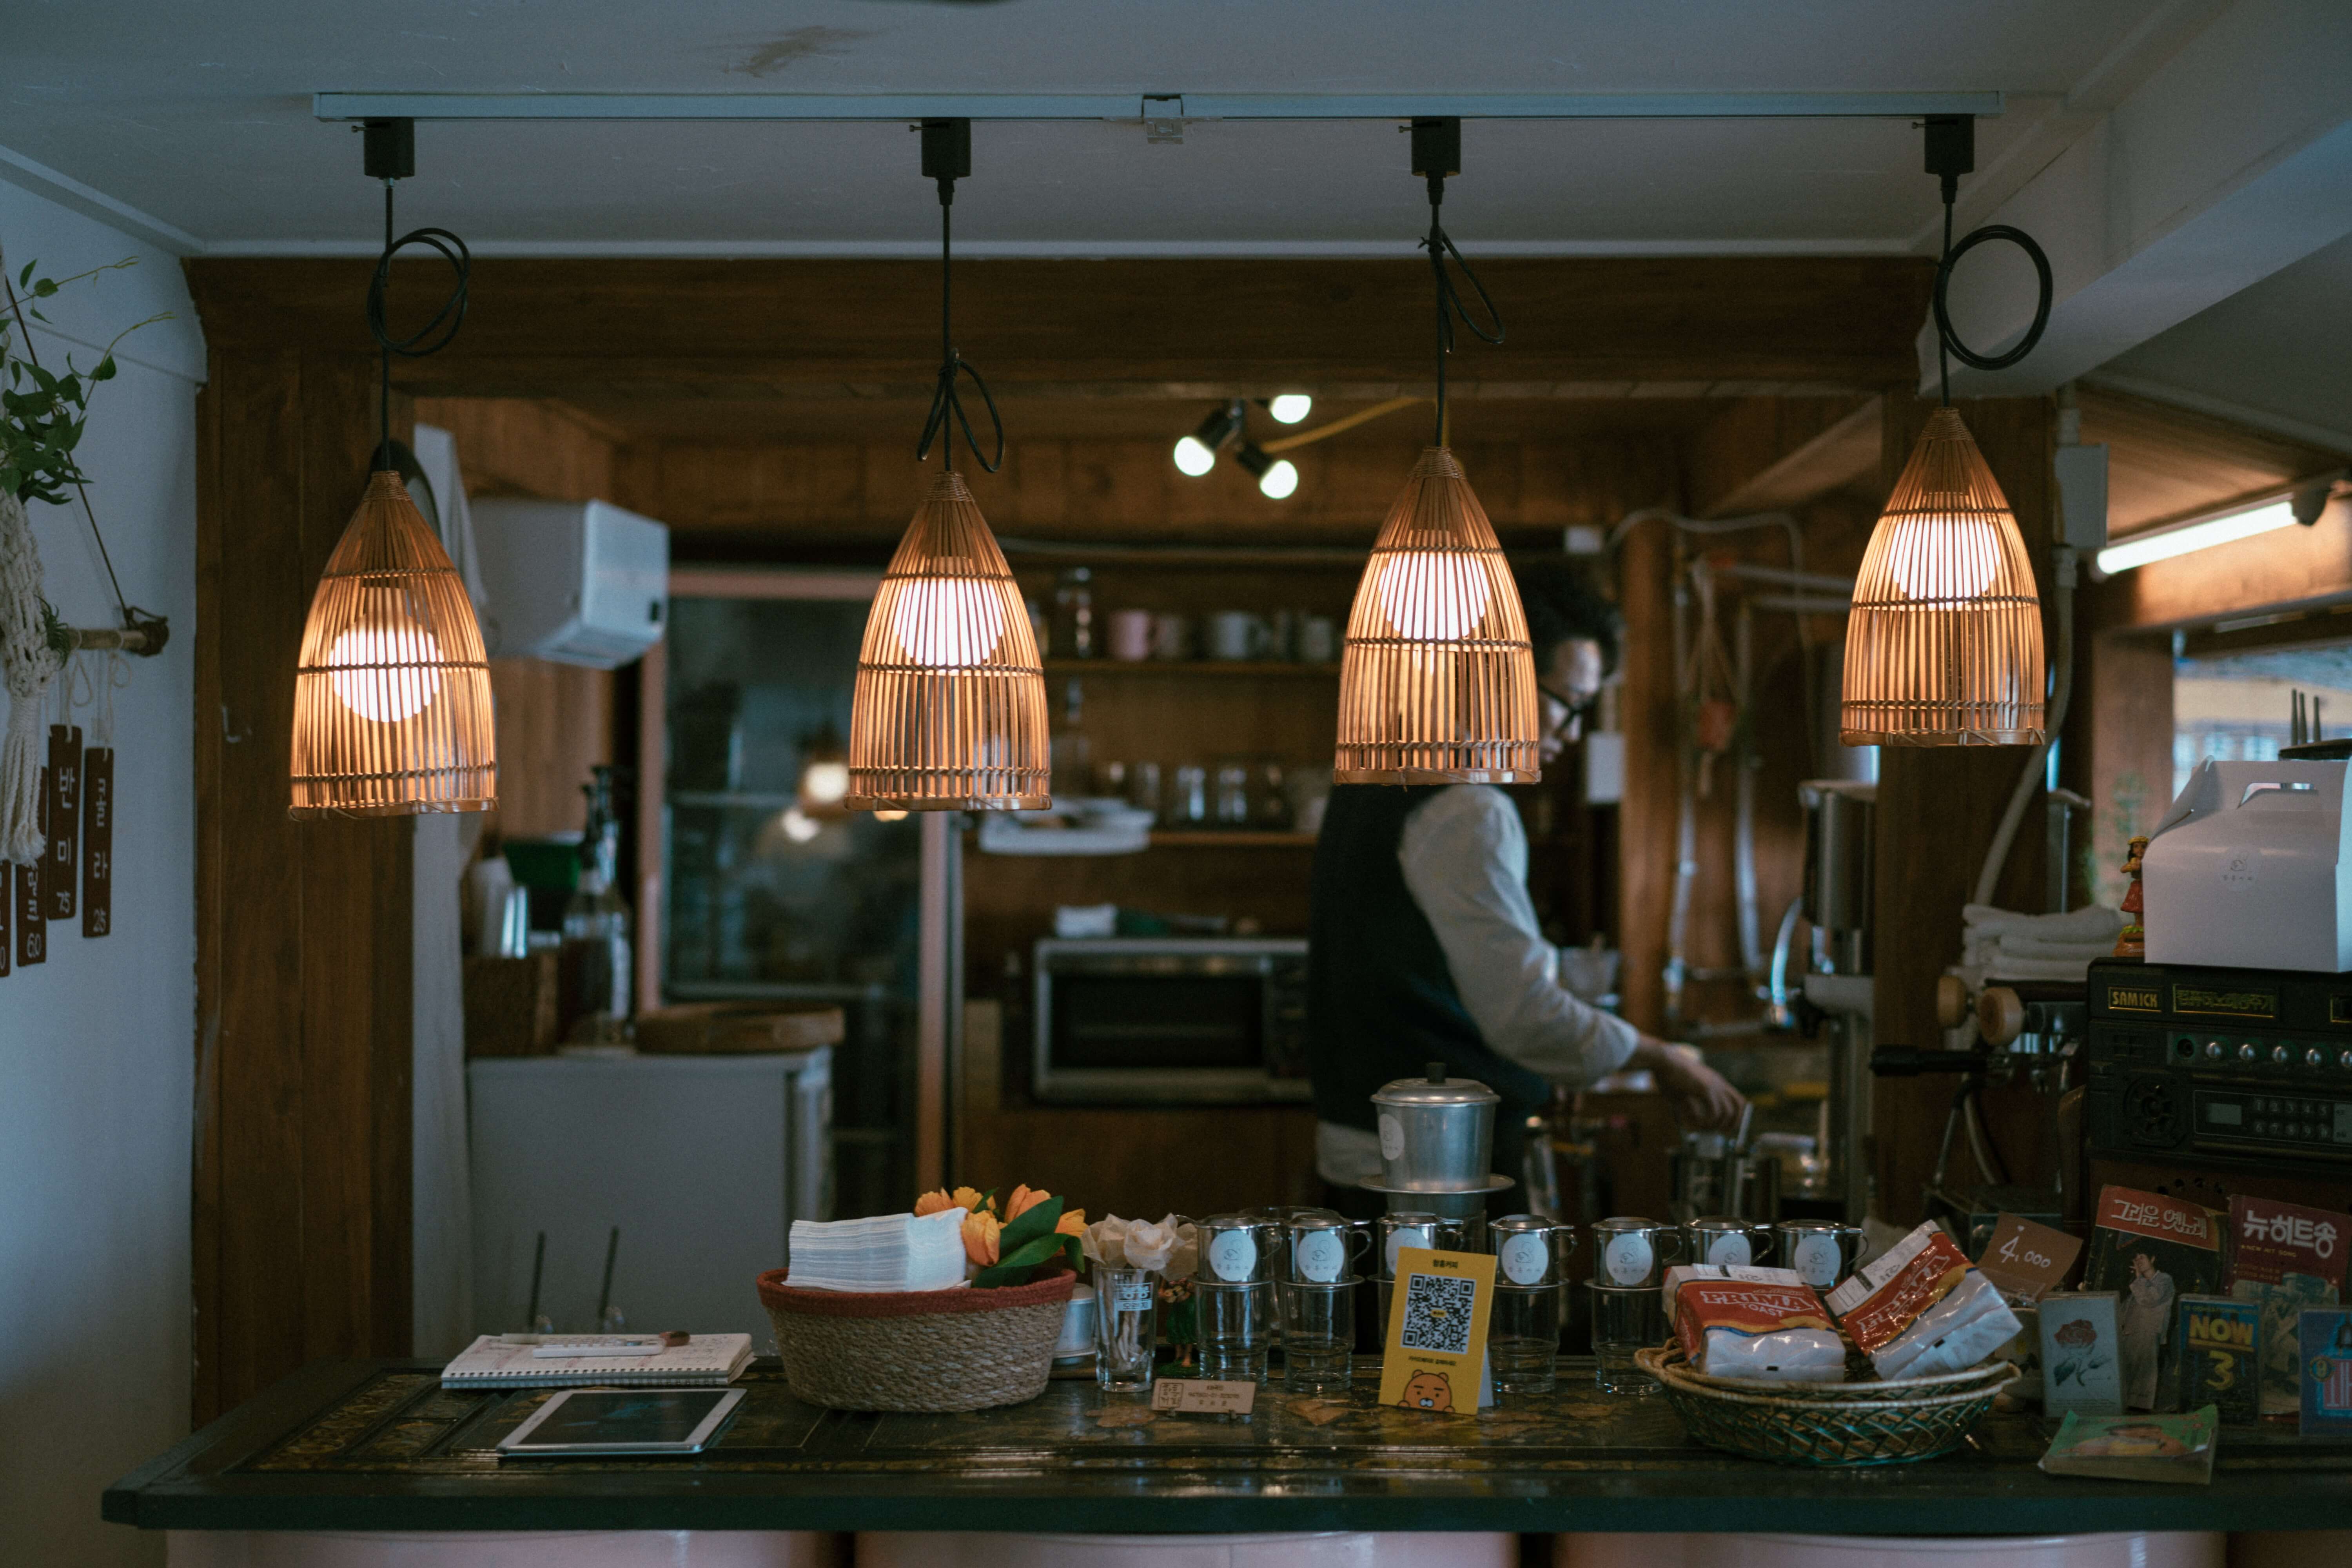 Low hanging lights in kitchen interiors over a wooden table